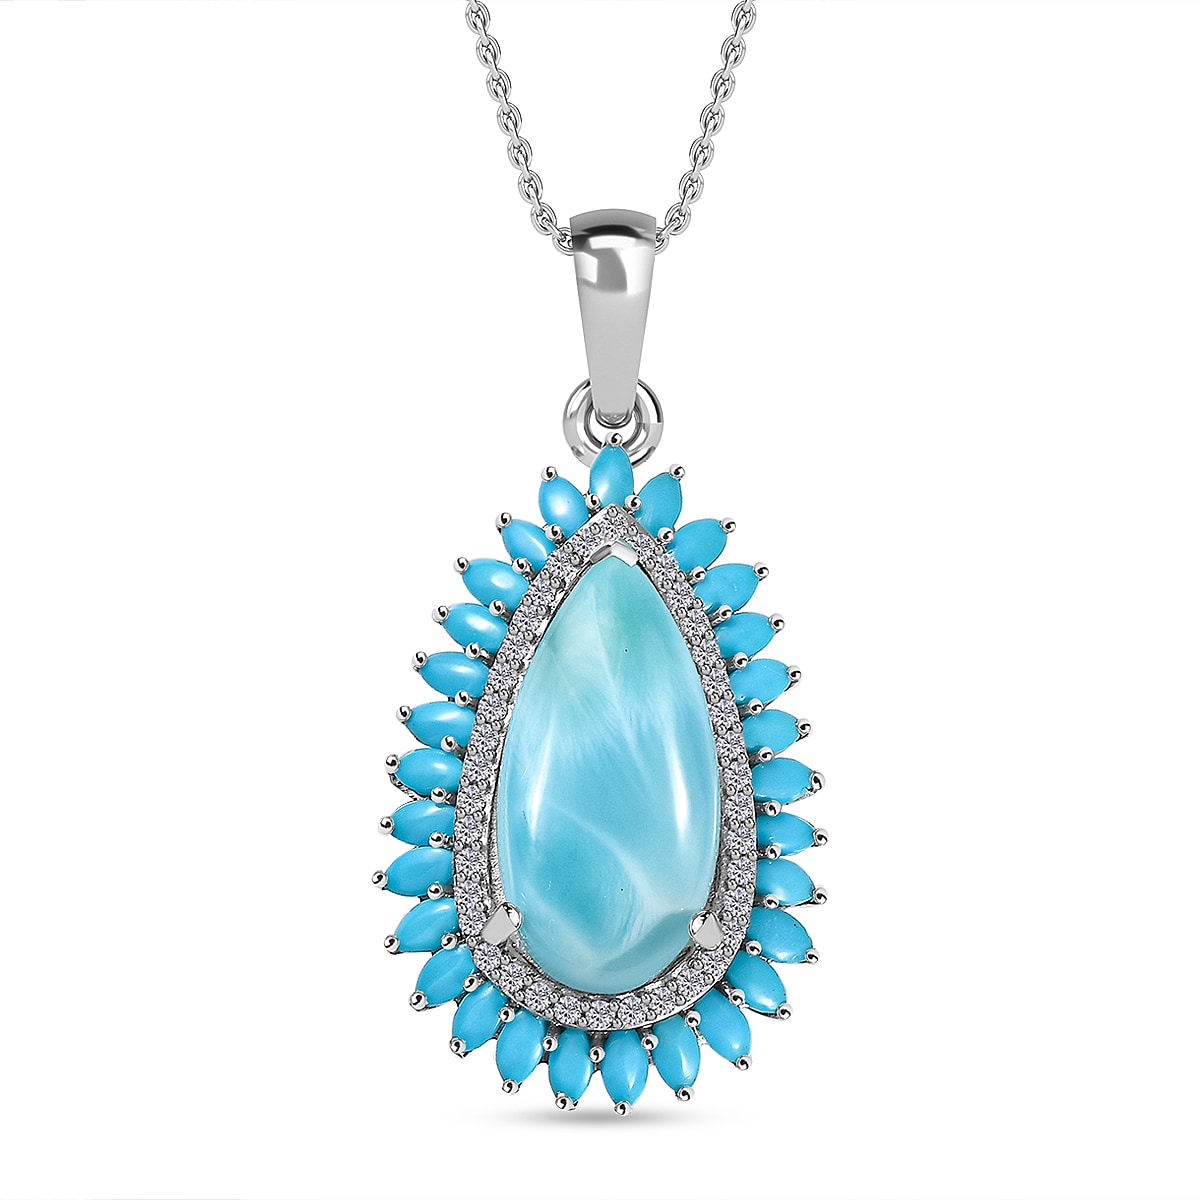 Cocktail Collection - Rare Size Larimar 20 X10 MM & Sleeping Beauty Turquoise Pendant with Chain (Size 20) in Platinum Overlay Sterling Silver  13.08 ct.